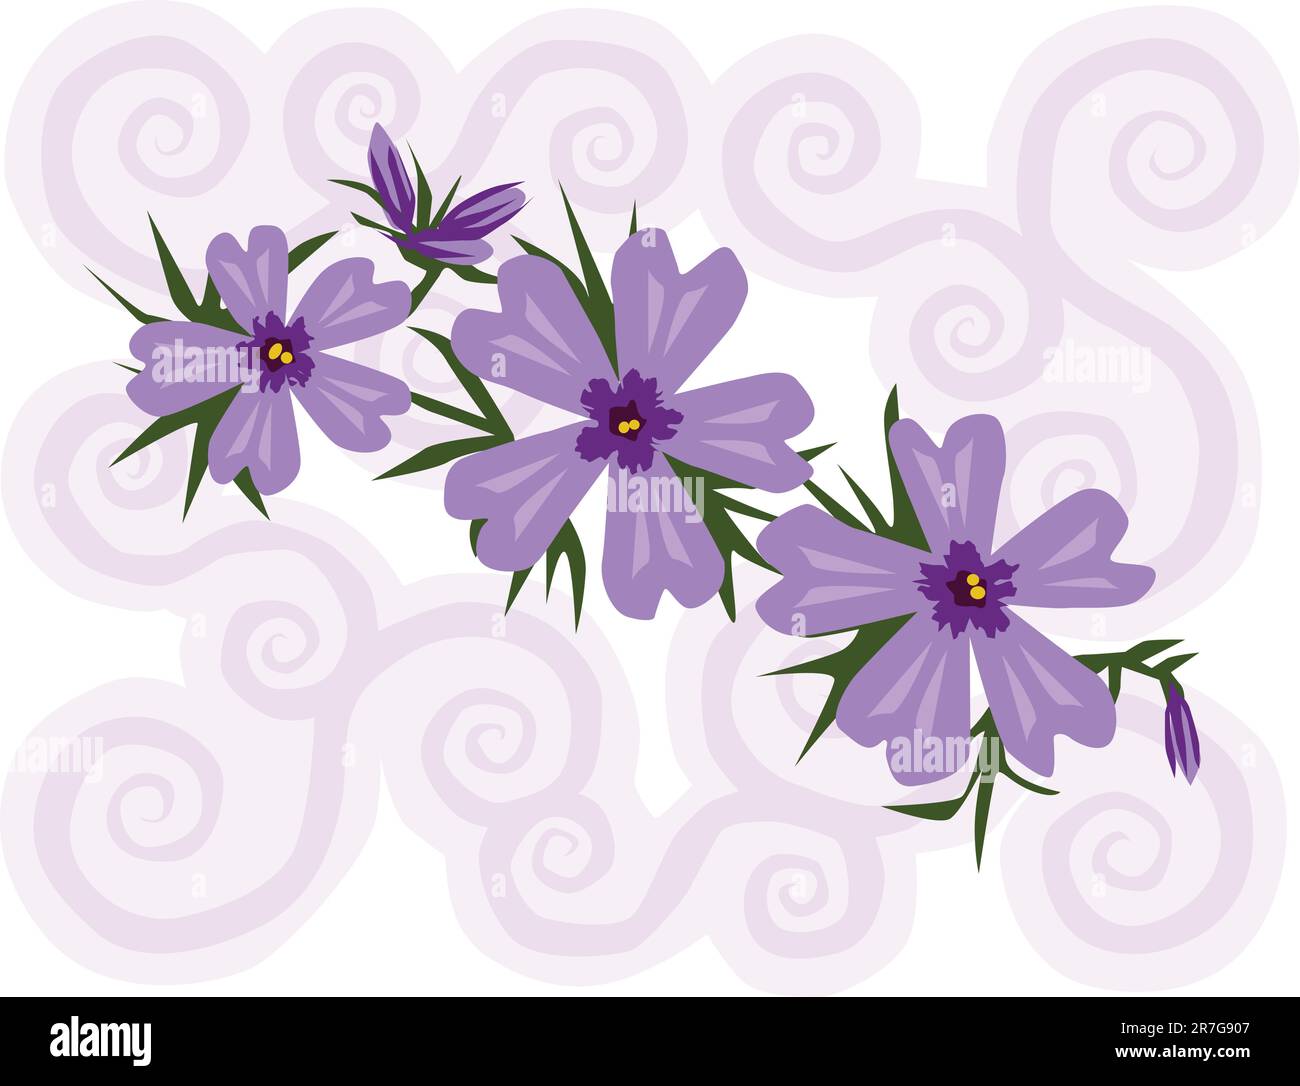 Vector illustration of purple phlox flowers with a swirly background. Stock Vector